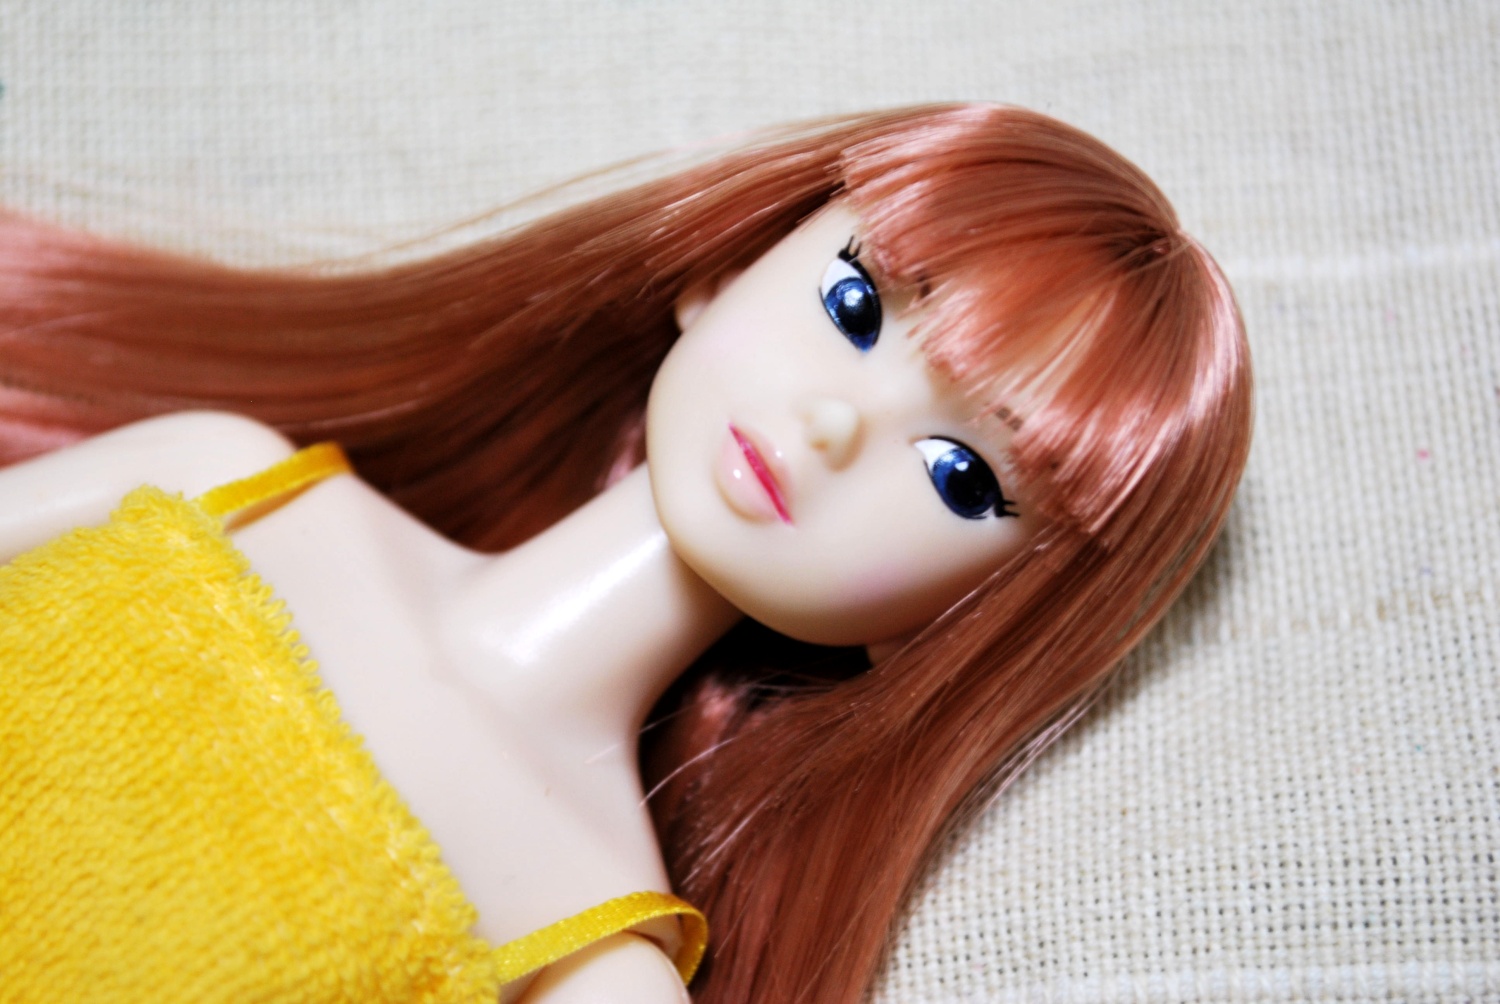 a doll with blue eyes lies on a blanket